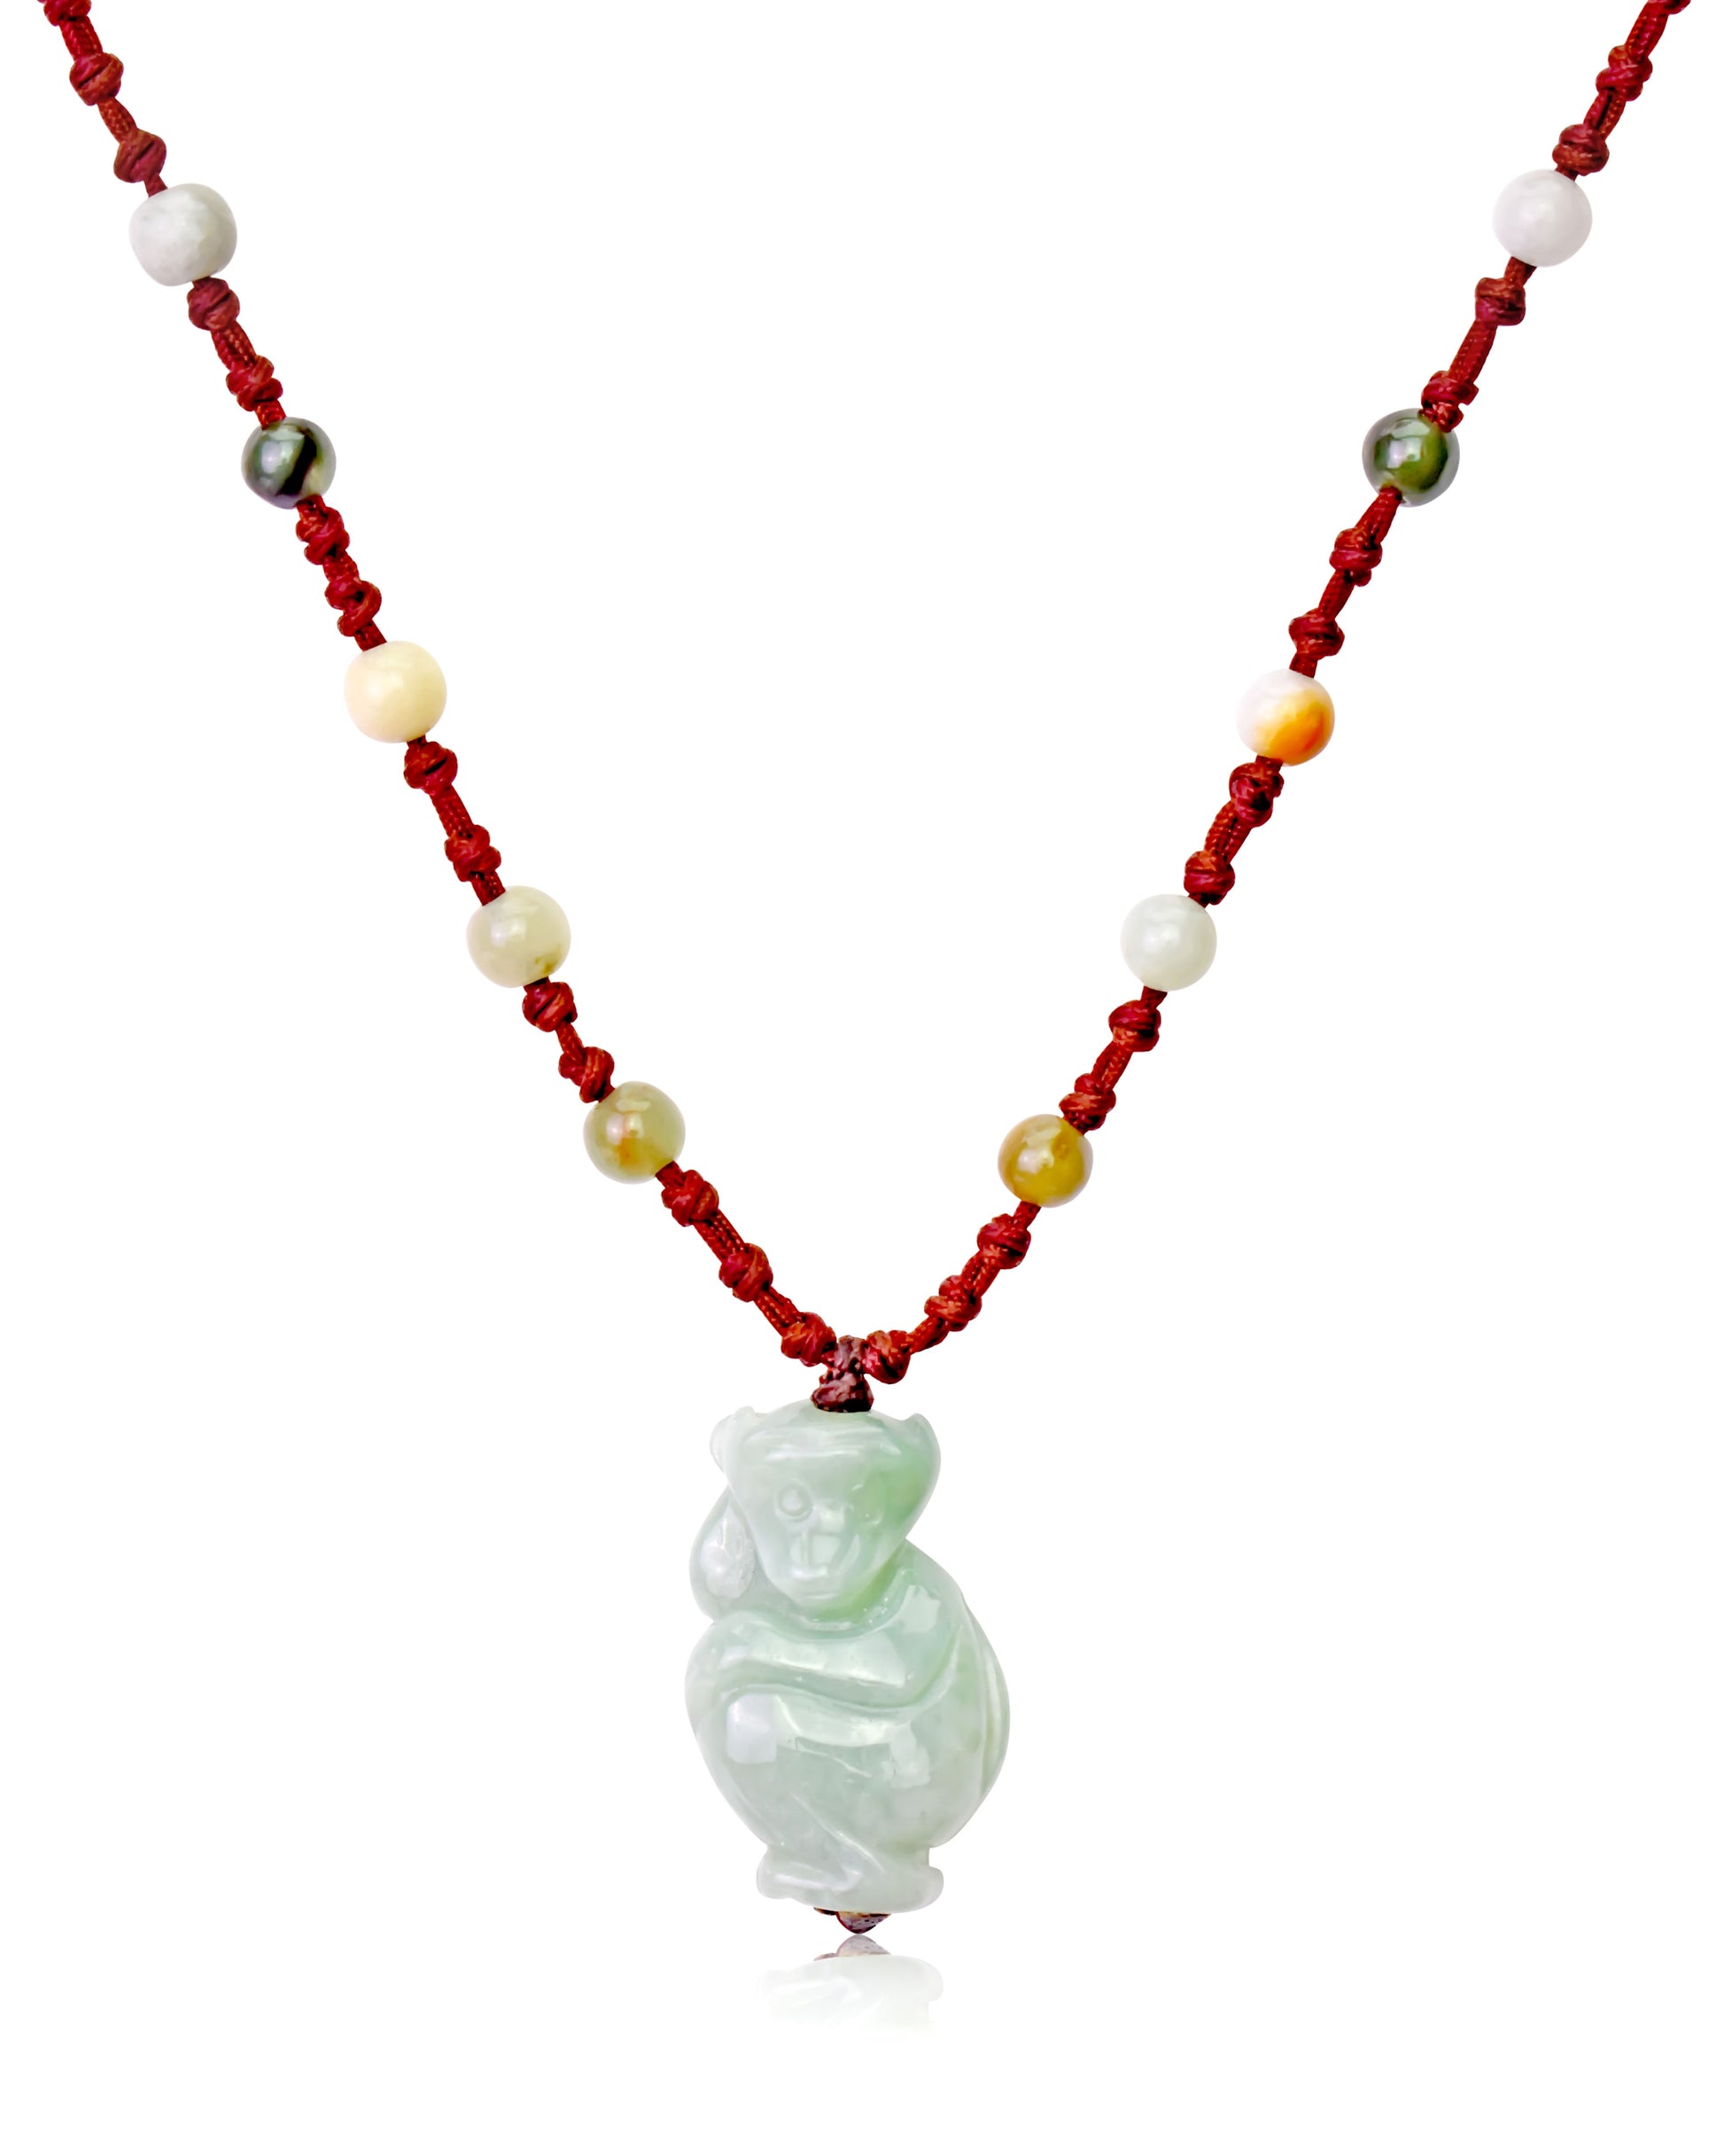 Look Great with a Monkey Chinese Zodiac Jade Pendant Necklace made with Brown Cord